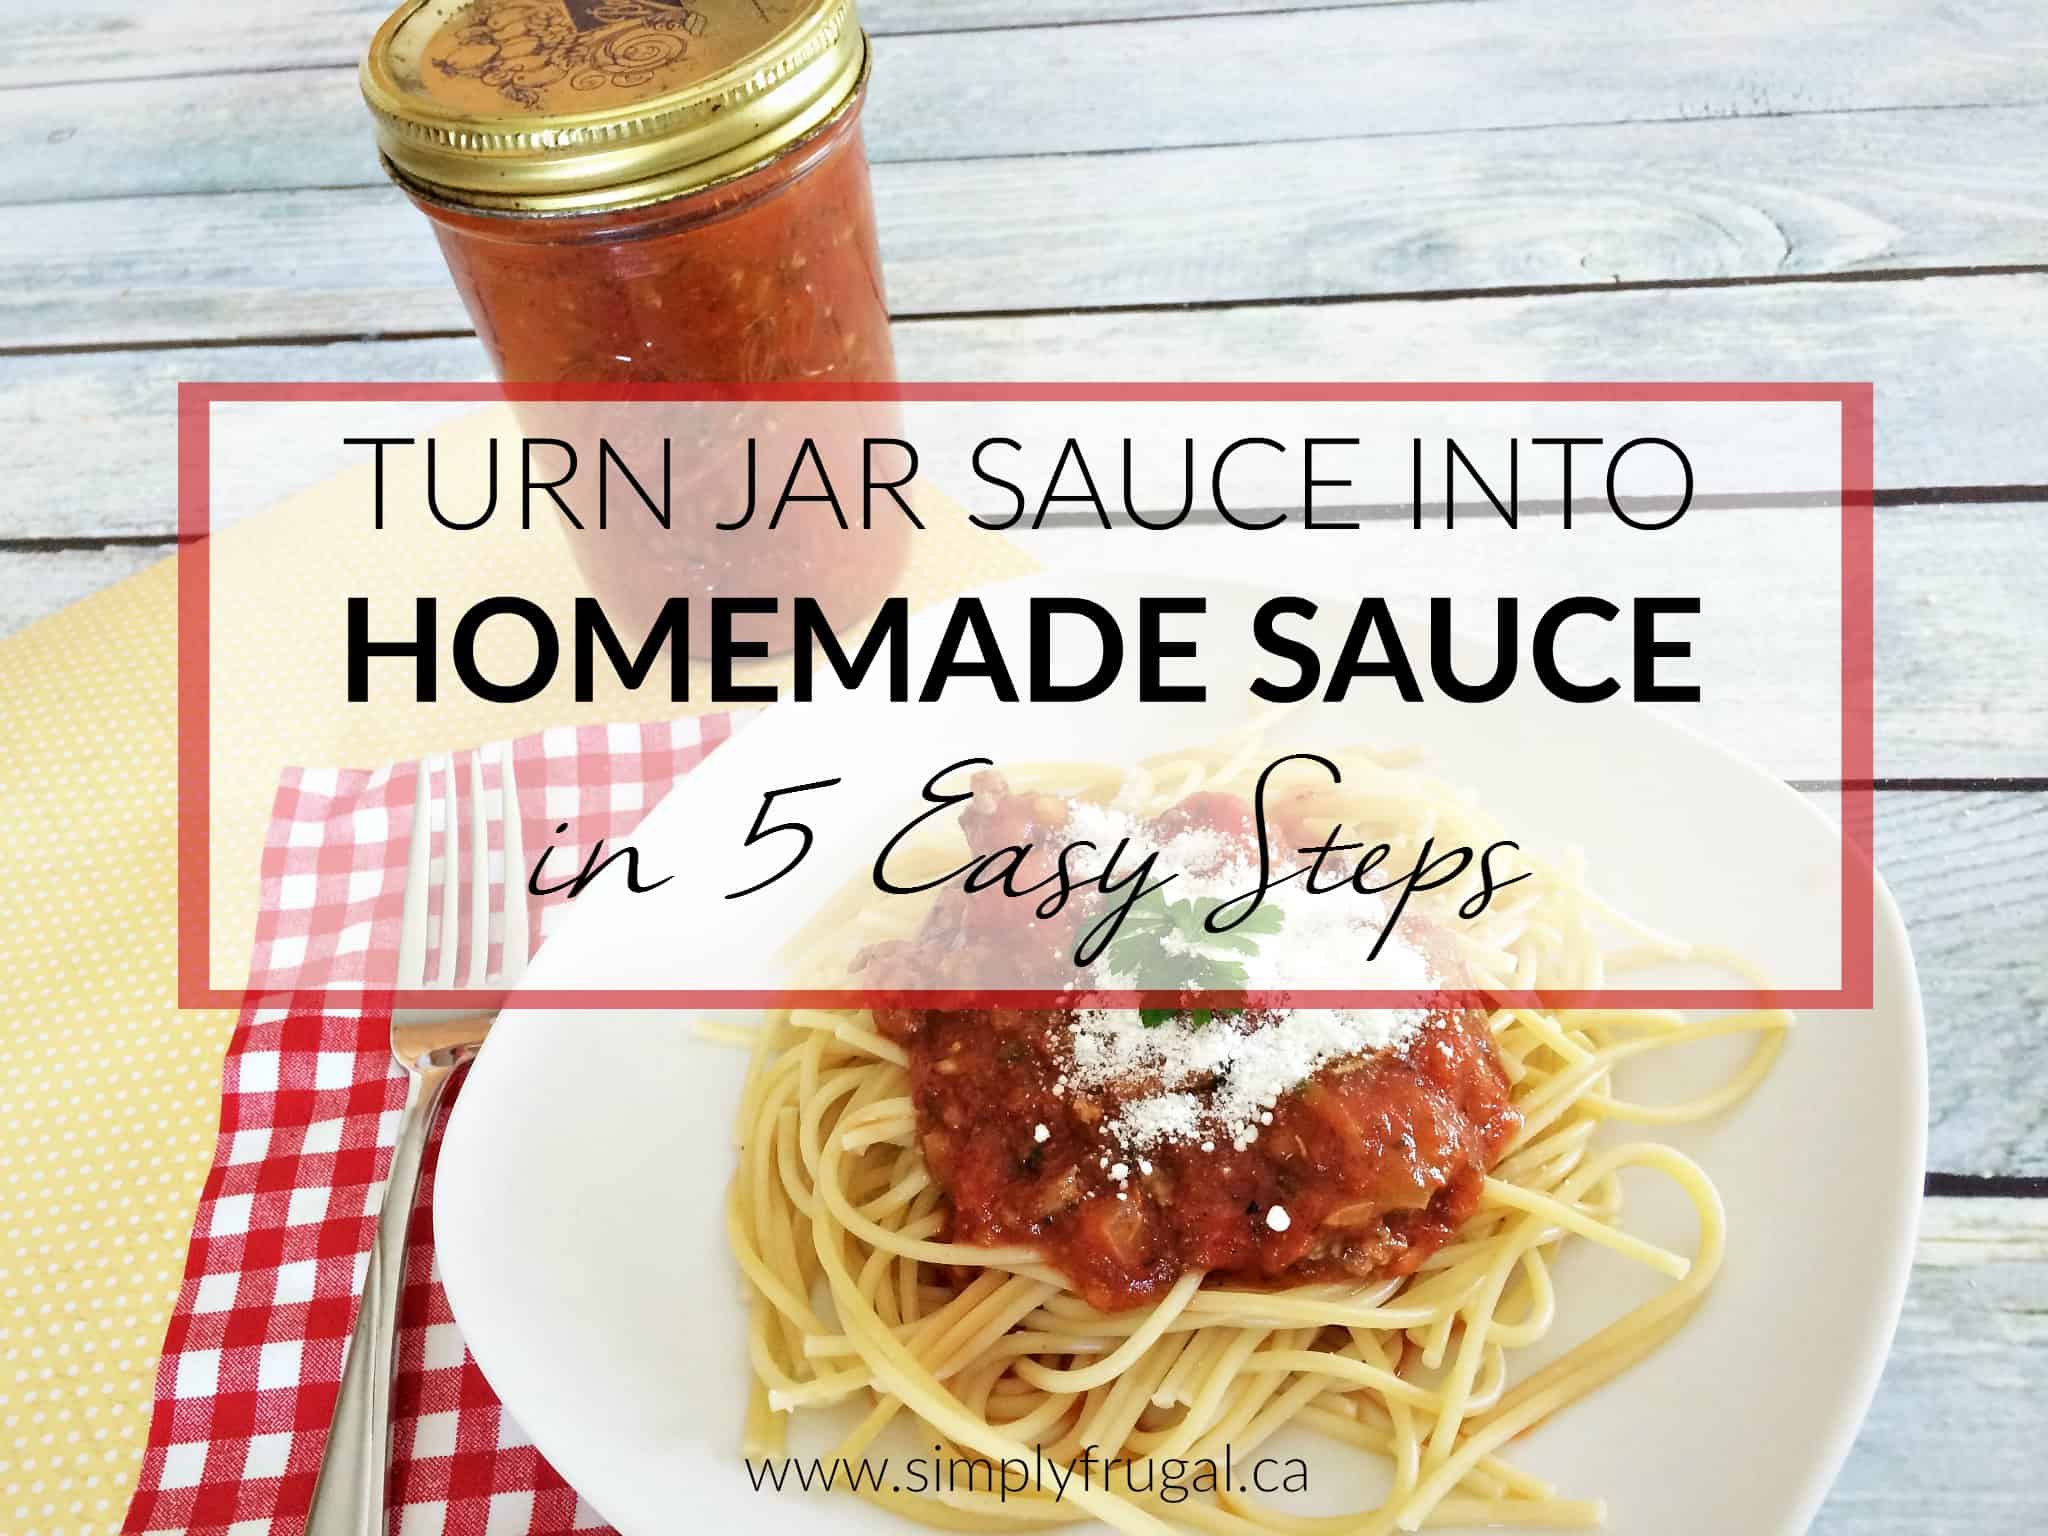 Expecting company for dinner? Impress your guests and be a kitchen superstar by turning bought jar sauce into homemade sauce in 5 easy steps!